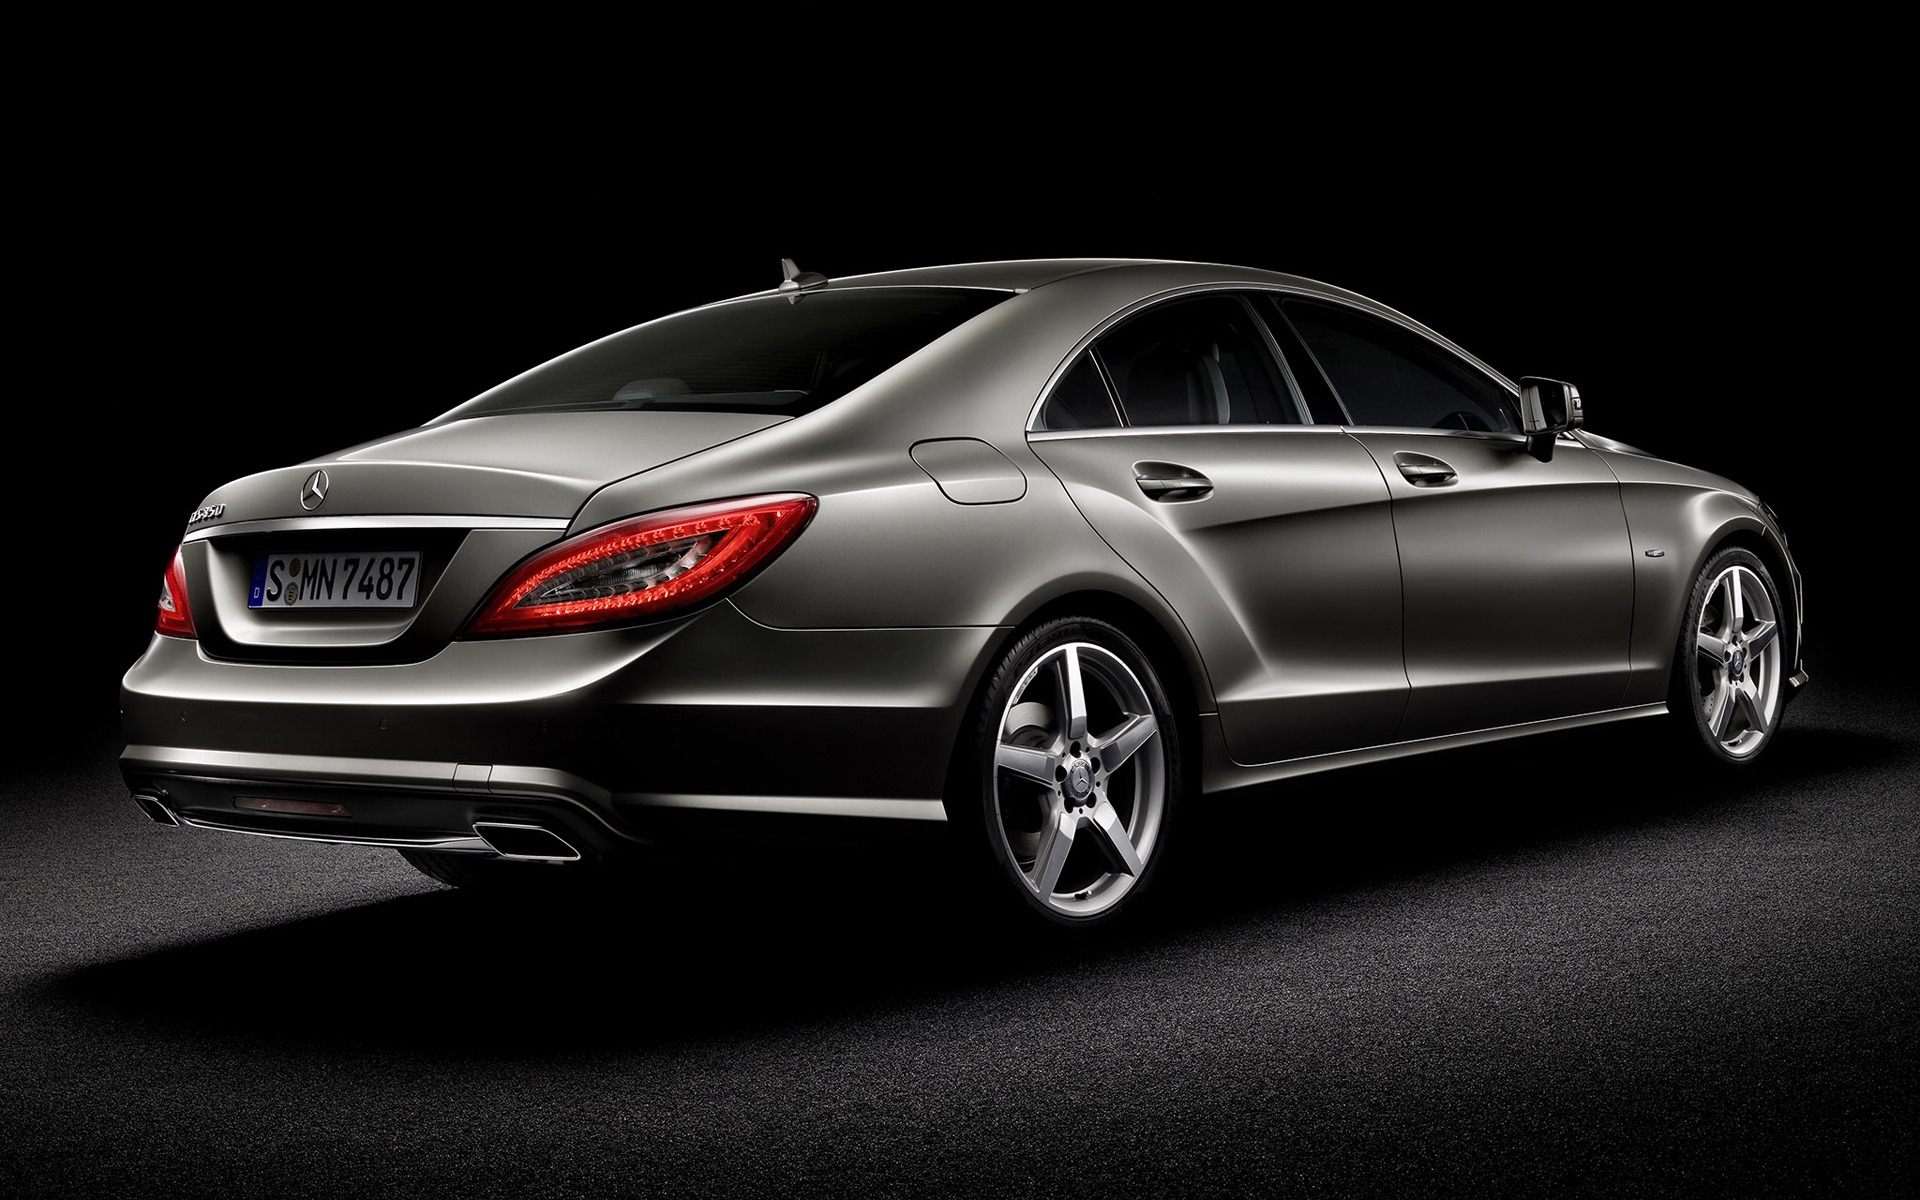 Mercedes CLS 2010 Rear for 1920 x 1200 widescreen resolution